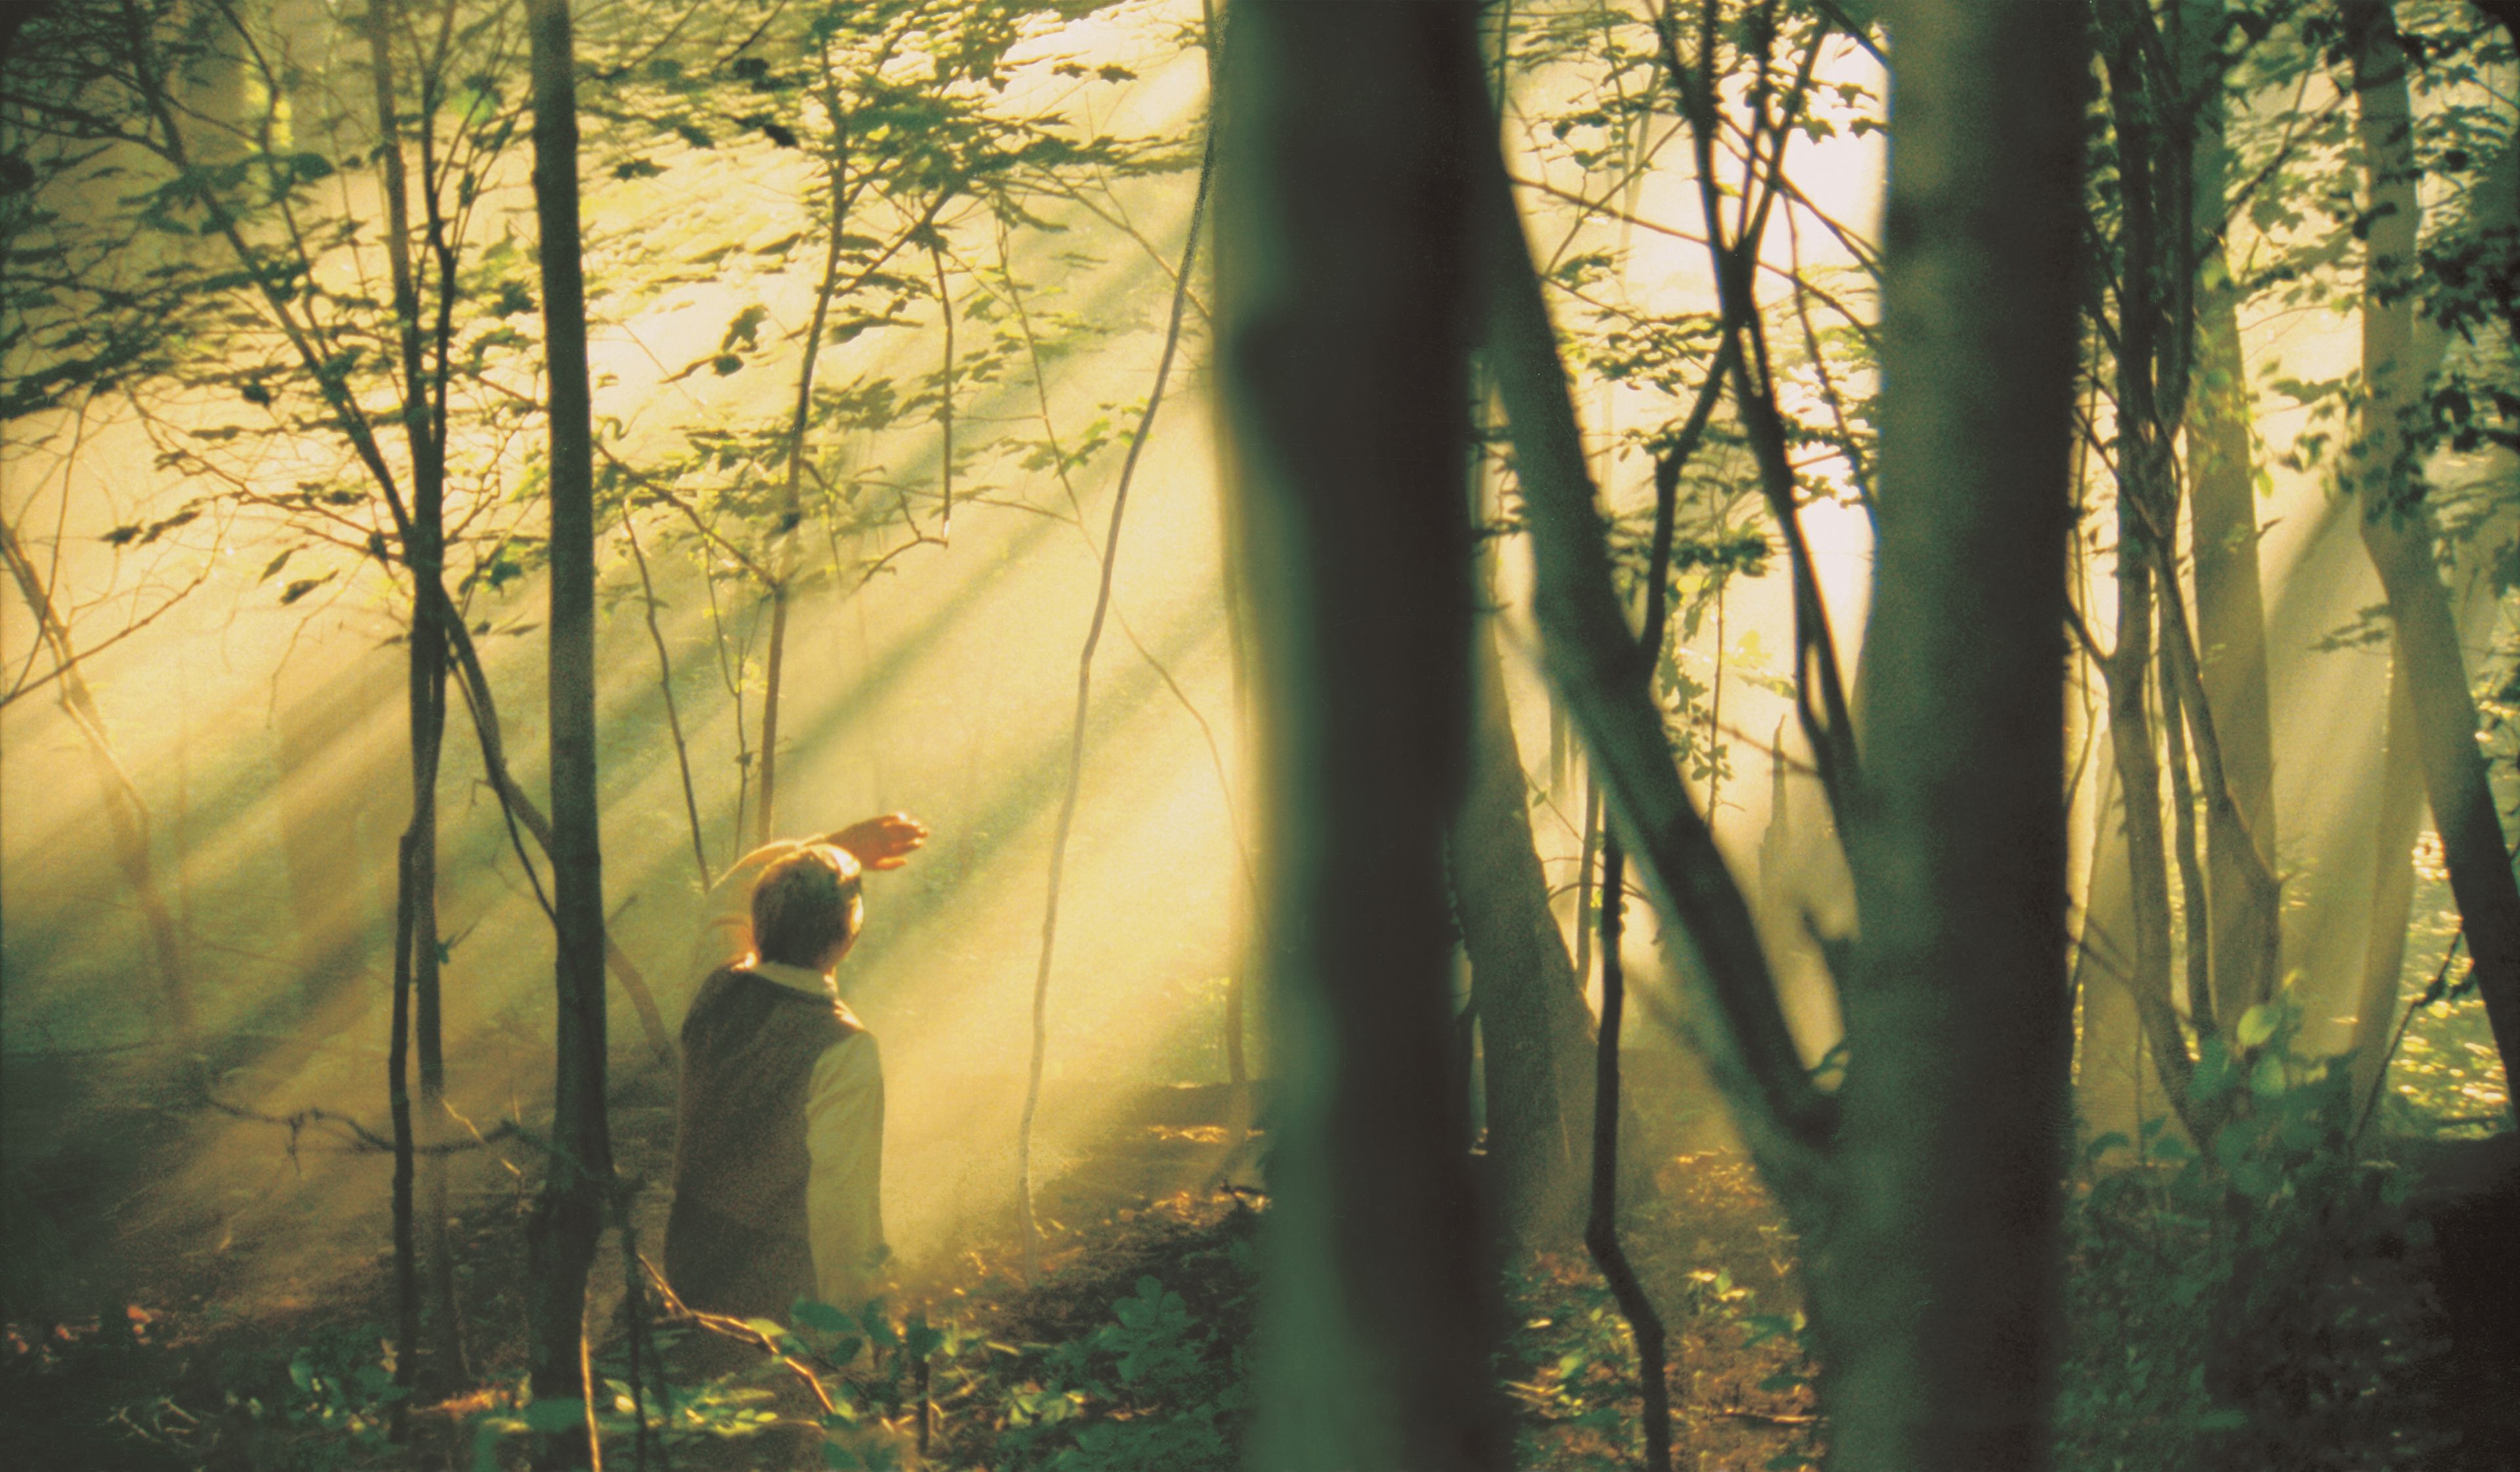 Joseph Smith Jr. kneeling in the Sacred Grove during the First Vision.